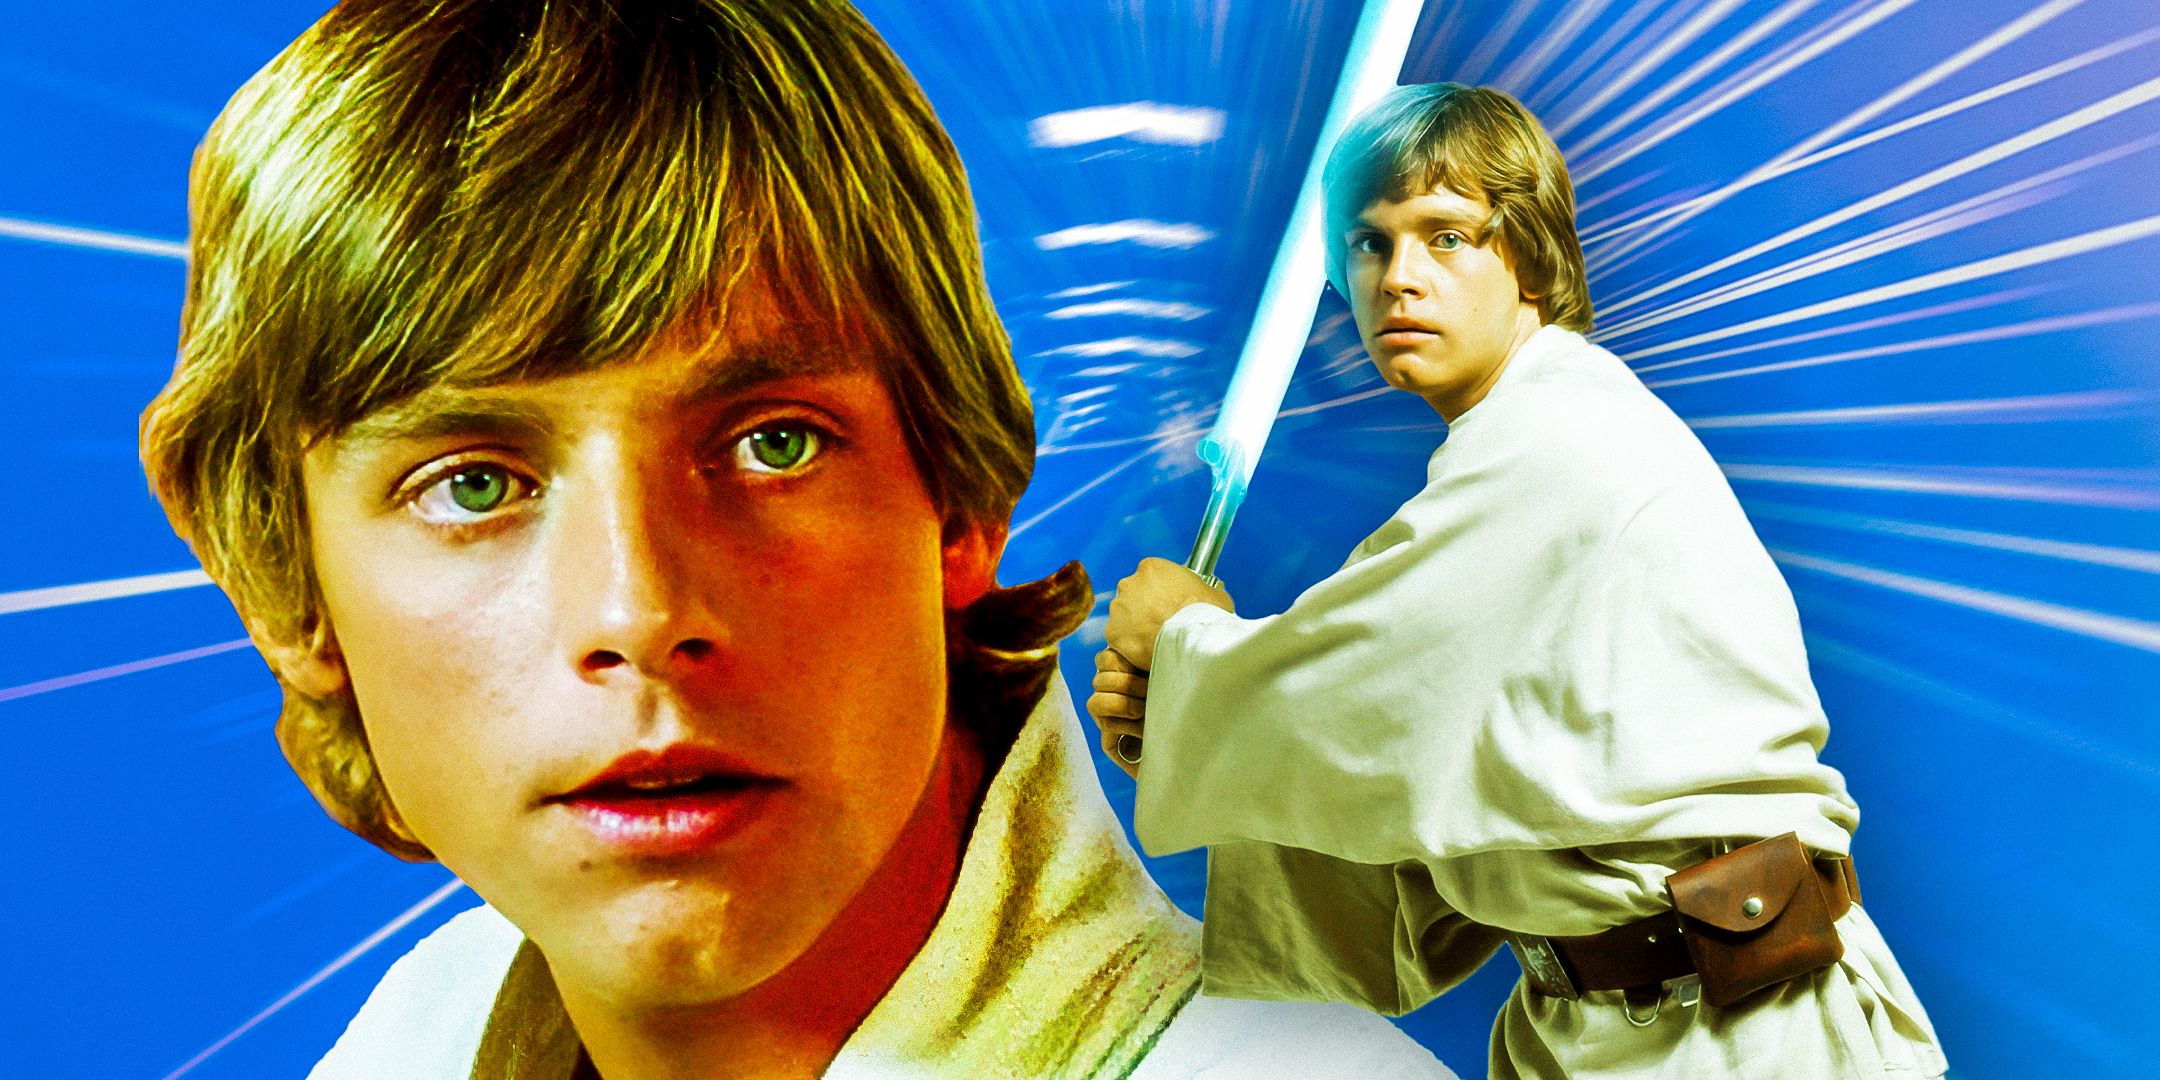 Mark Hamill as Luke Skywalker in A New Hope in a close up to the left and wielding his blue lightsaber to the right in a combined image in front of a blue background